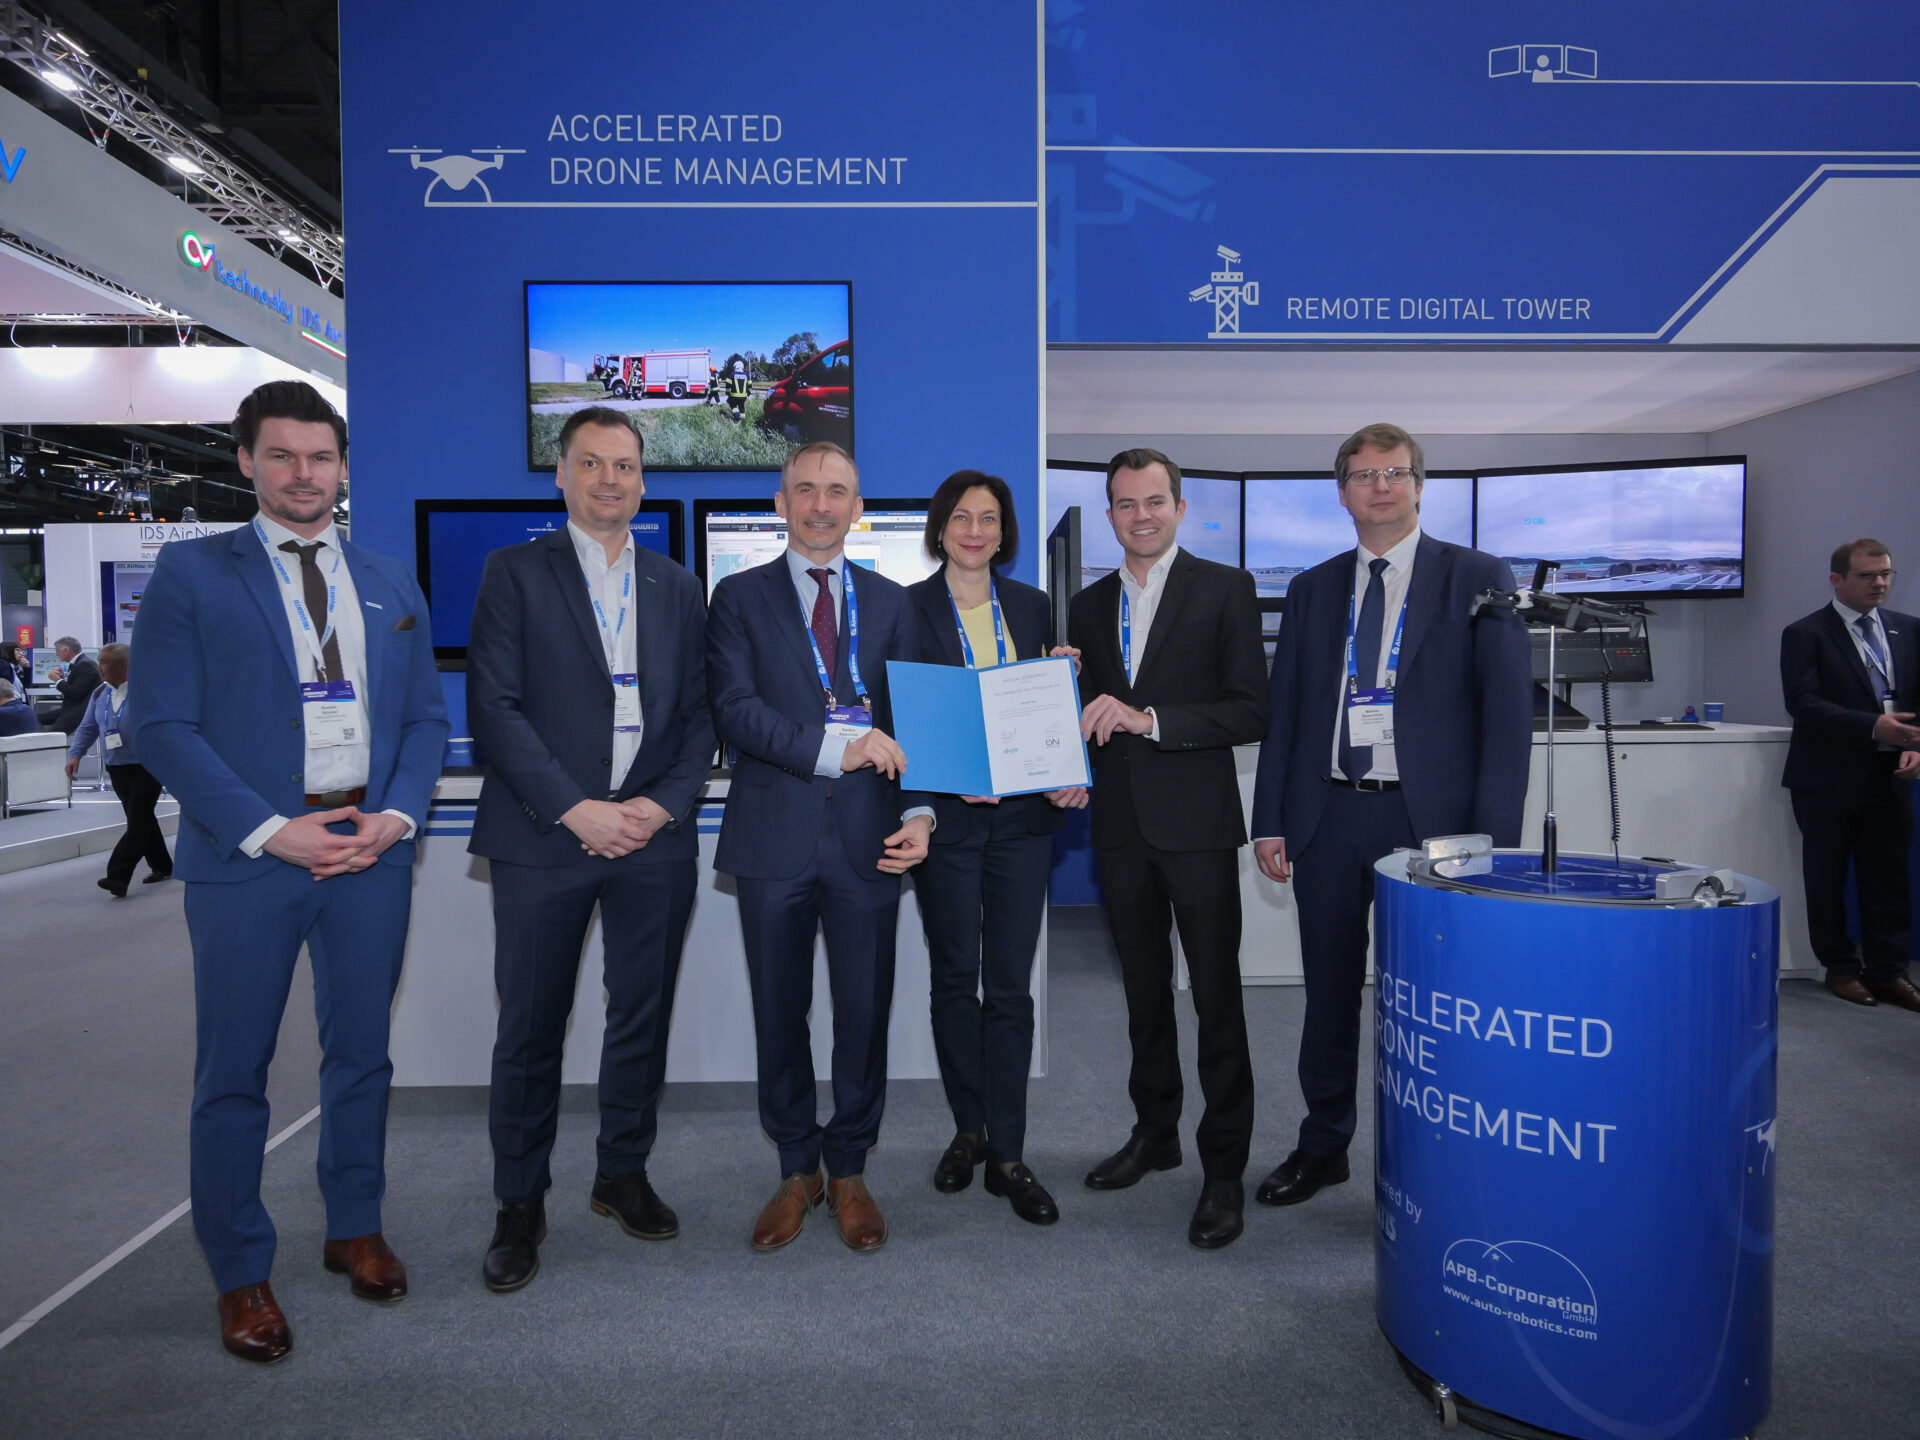 Faster drone flight approvals with FREQUENTIS automated risk assessment tool in Lithuania